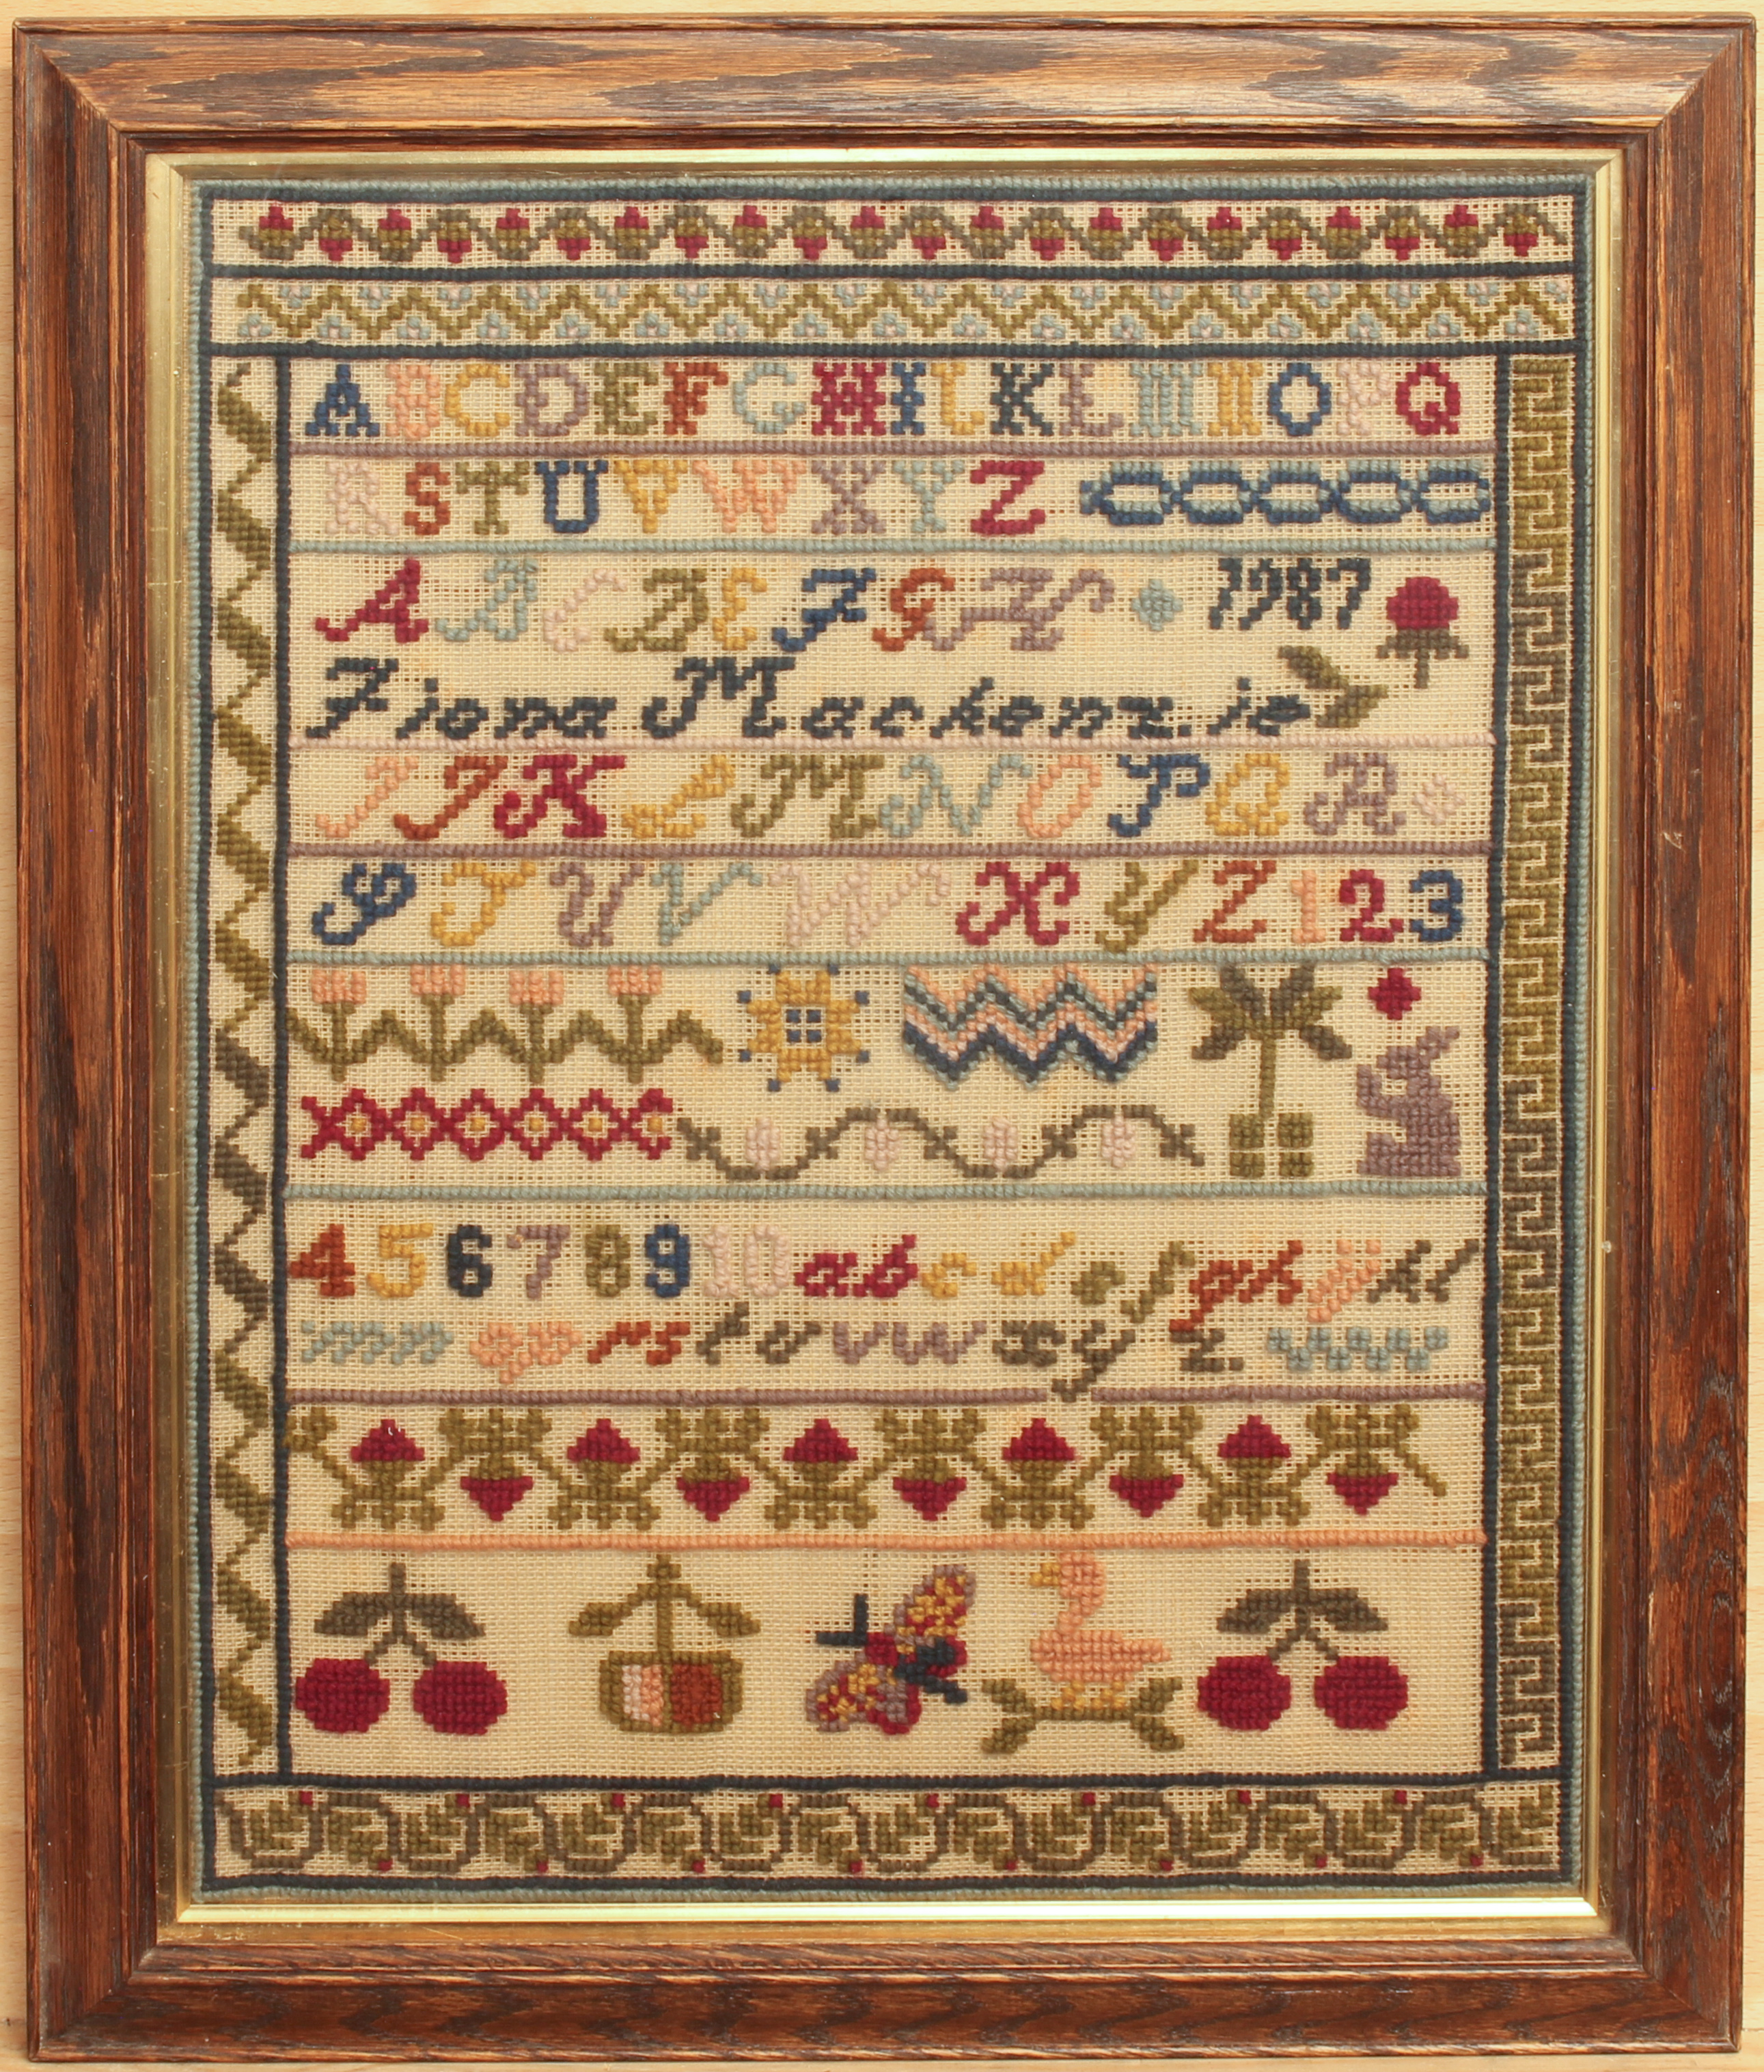 A 20th century sampler - inscribed 'Fiona Mackenzie 1987', with alphabet and numerical panels over